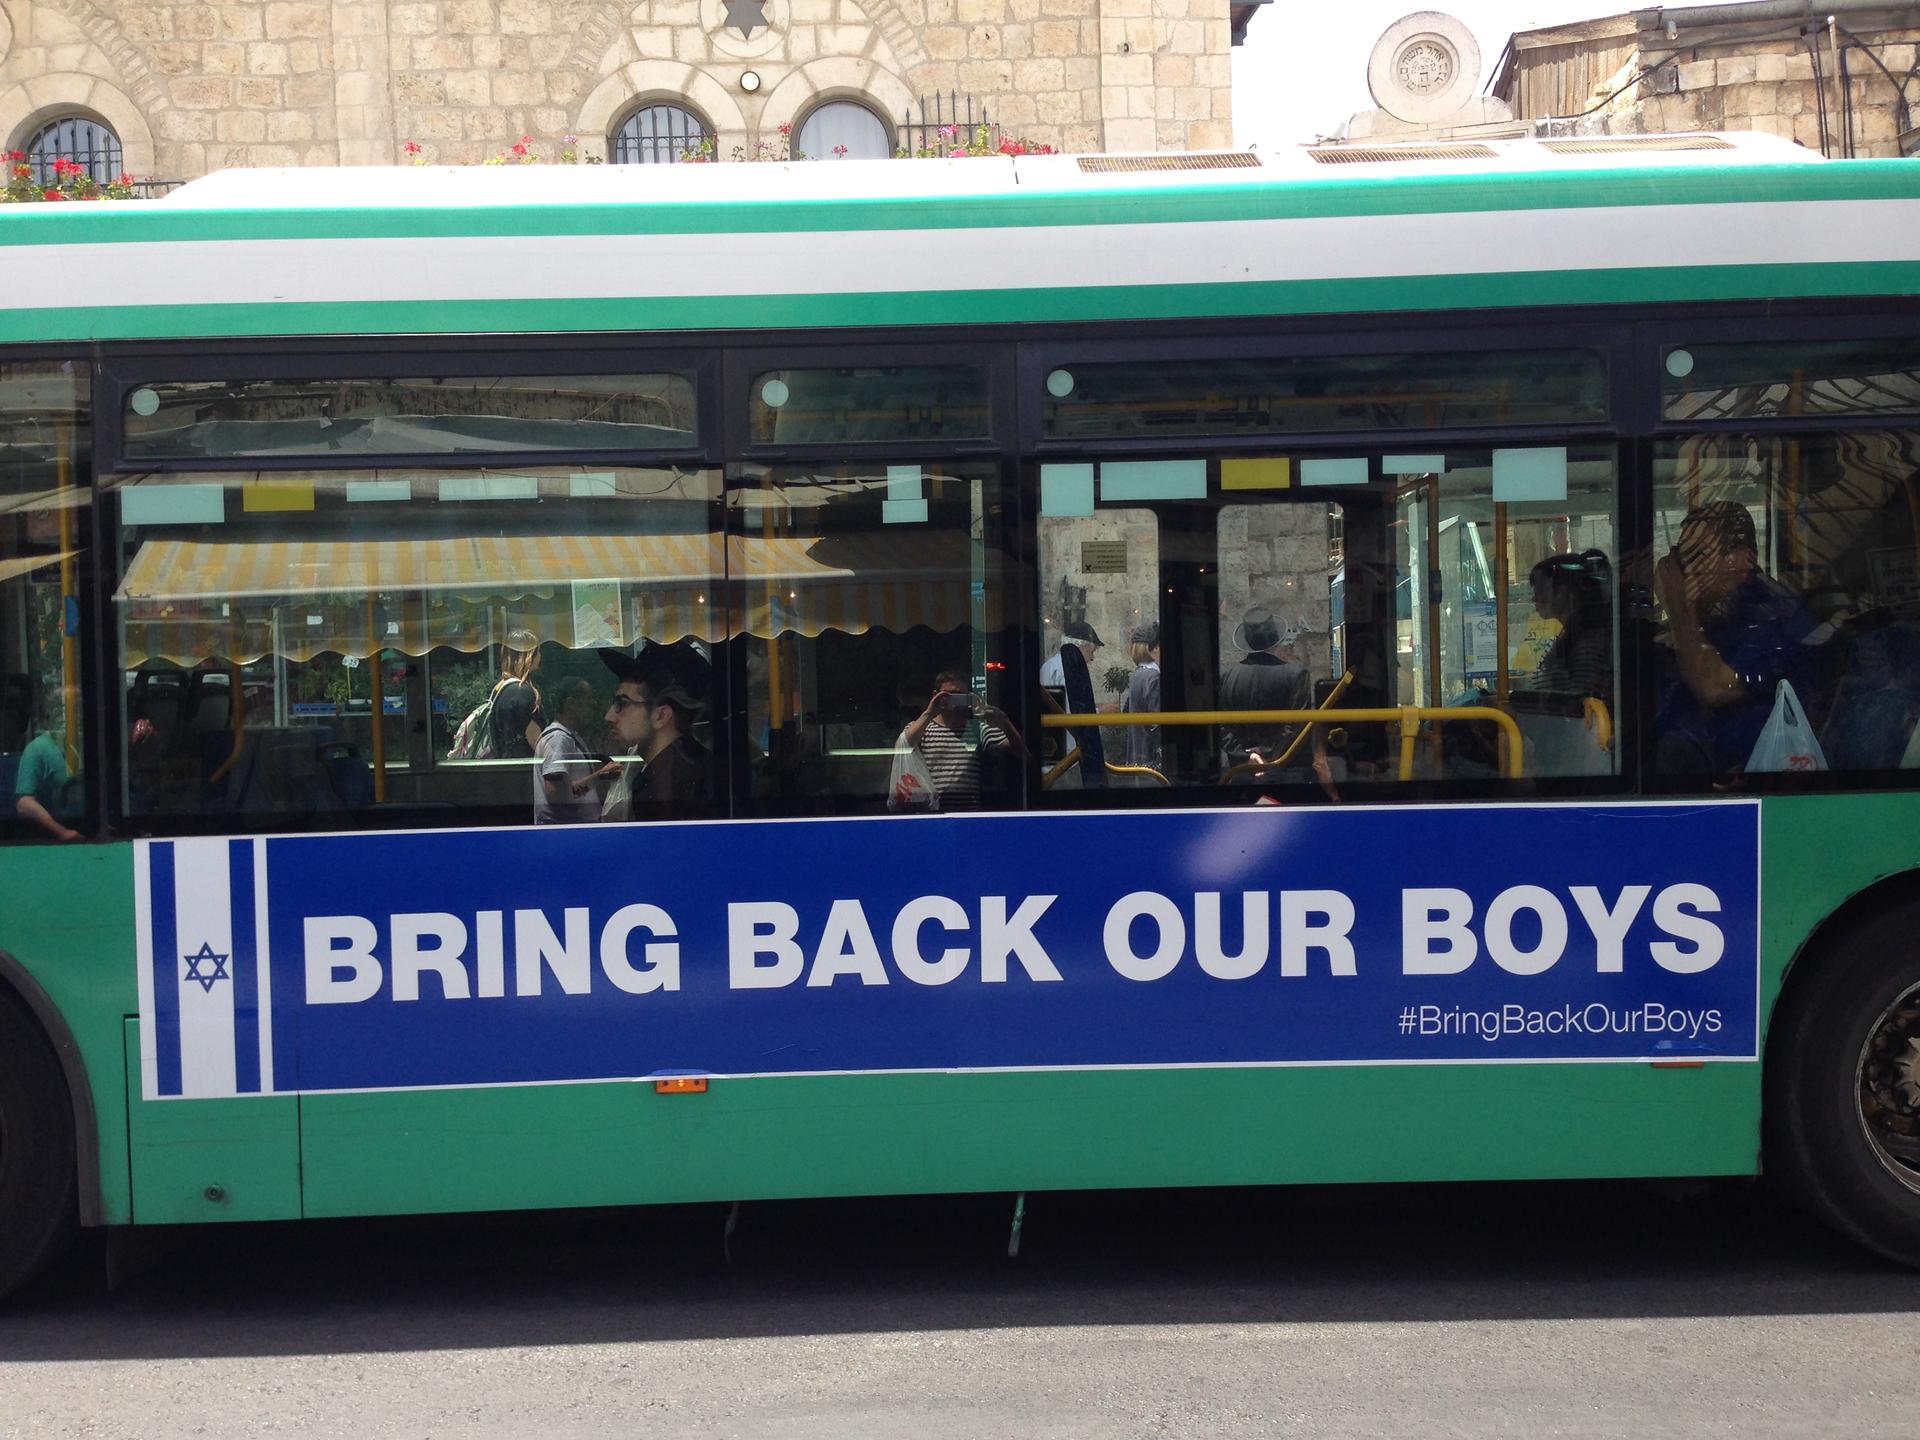 Israel’s largest bus company plastered buses with big ads featuring the #BringBackOurBoys slogan. 